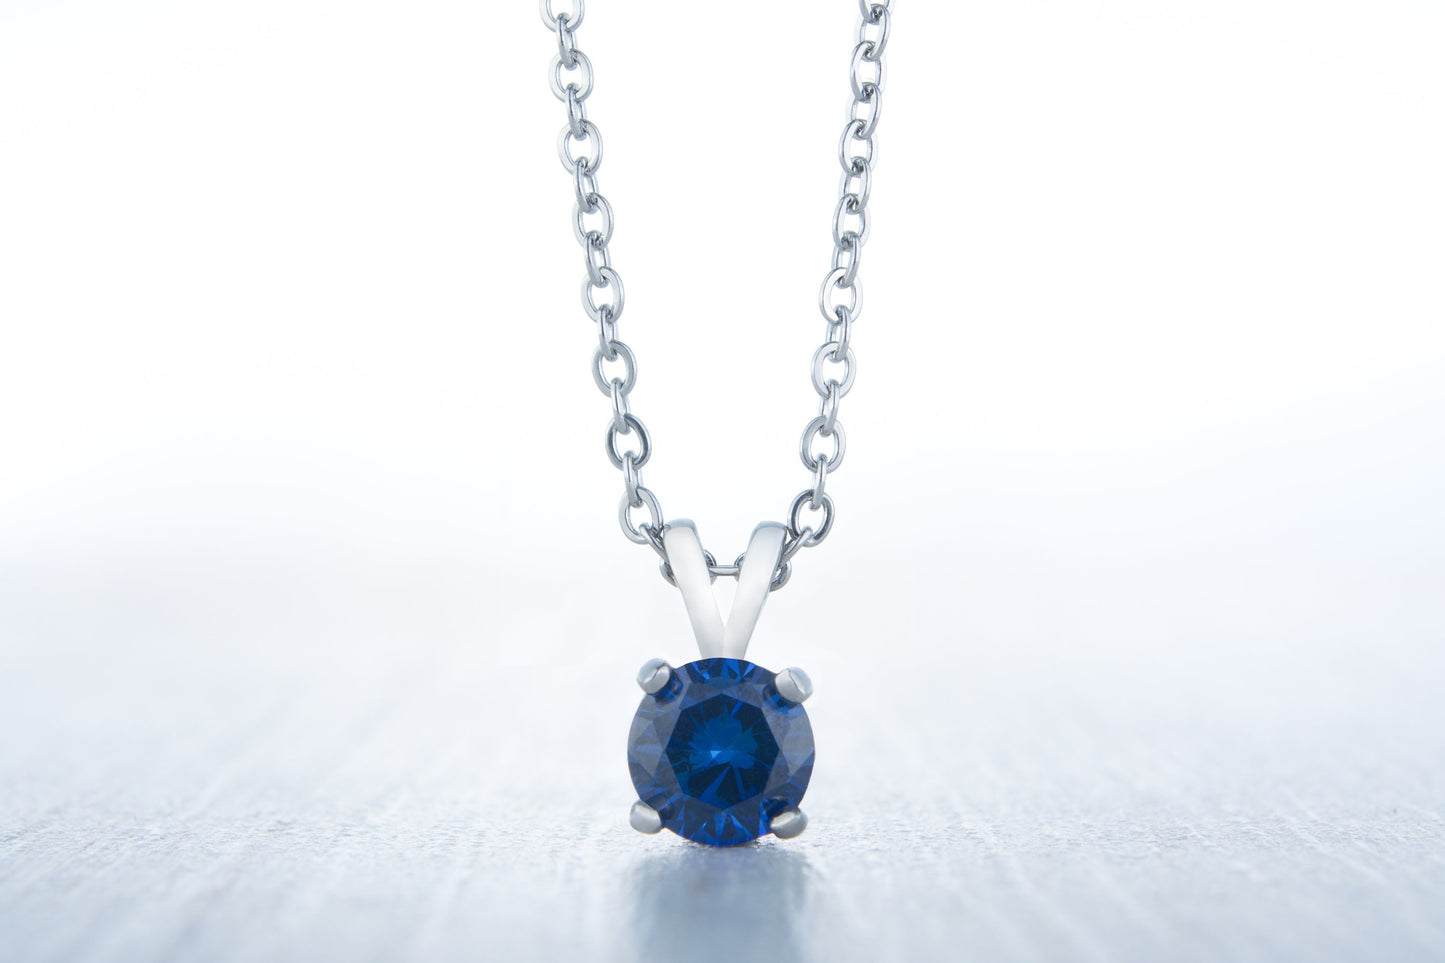 Royal blue sapphire pendant necklace - Available in white gold or titanium